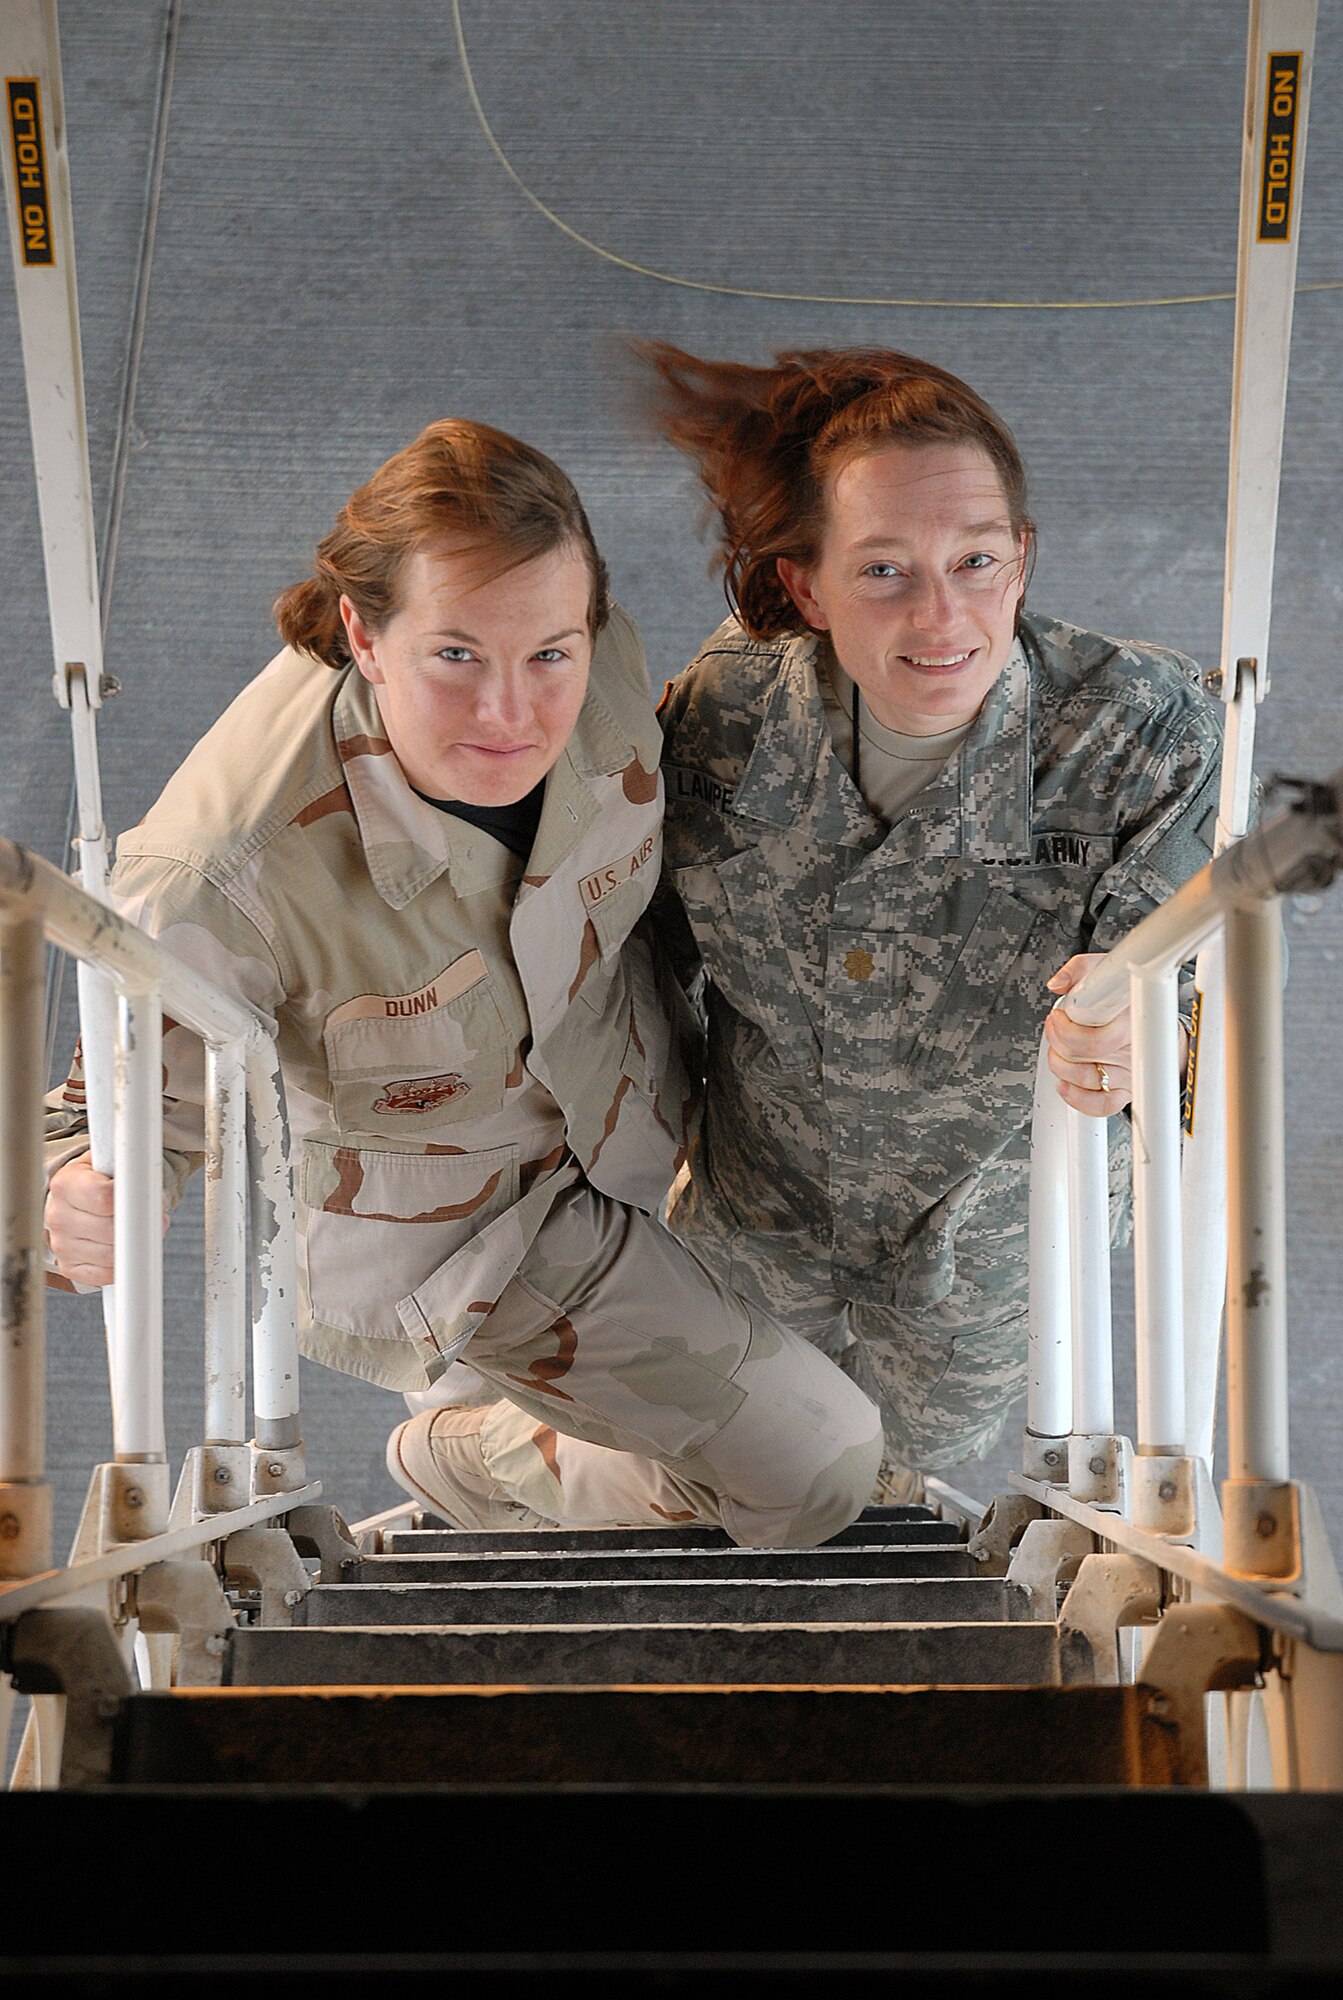 SOUTHWEST ASIA - Tech. Sgt. Jenny Dunn, 379th Expeditionary Maintenance Squadron weapons systems technician, gives her sister, U.S. Army Maj. Melinda Lampert, a tour of a B-1B Lancer Bomber at a Southwest Asia air base Dec. 11. The sisters, both deployed to the Southwest Asia theater, met for a brief visit. Major Lampert is visiting her sister on a four-day pass from an Army Base in Iraq. Major Lampert is a physician's assistant with the Minnesota Army National Guard. Sergeant Dunn's home station is Ellsworth Air Force Base, S. D. The sister's hometown is Bowlus, Minn. (U. S. Air Force photo/Staff Sgt. Douglas Olsen)